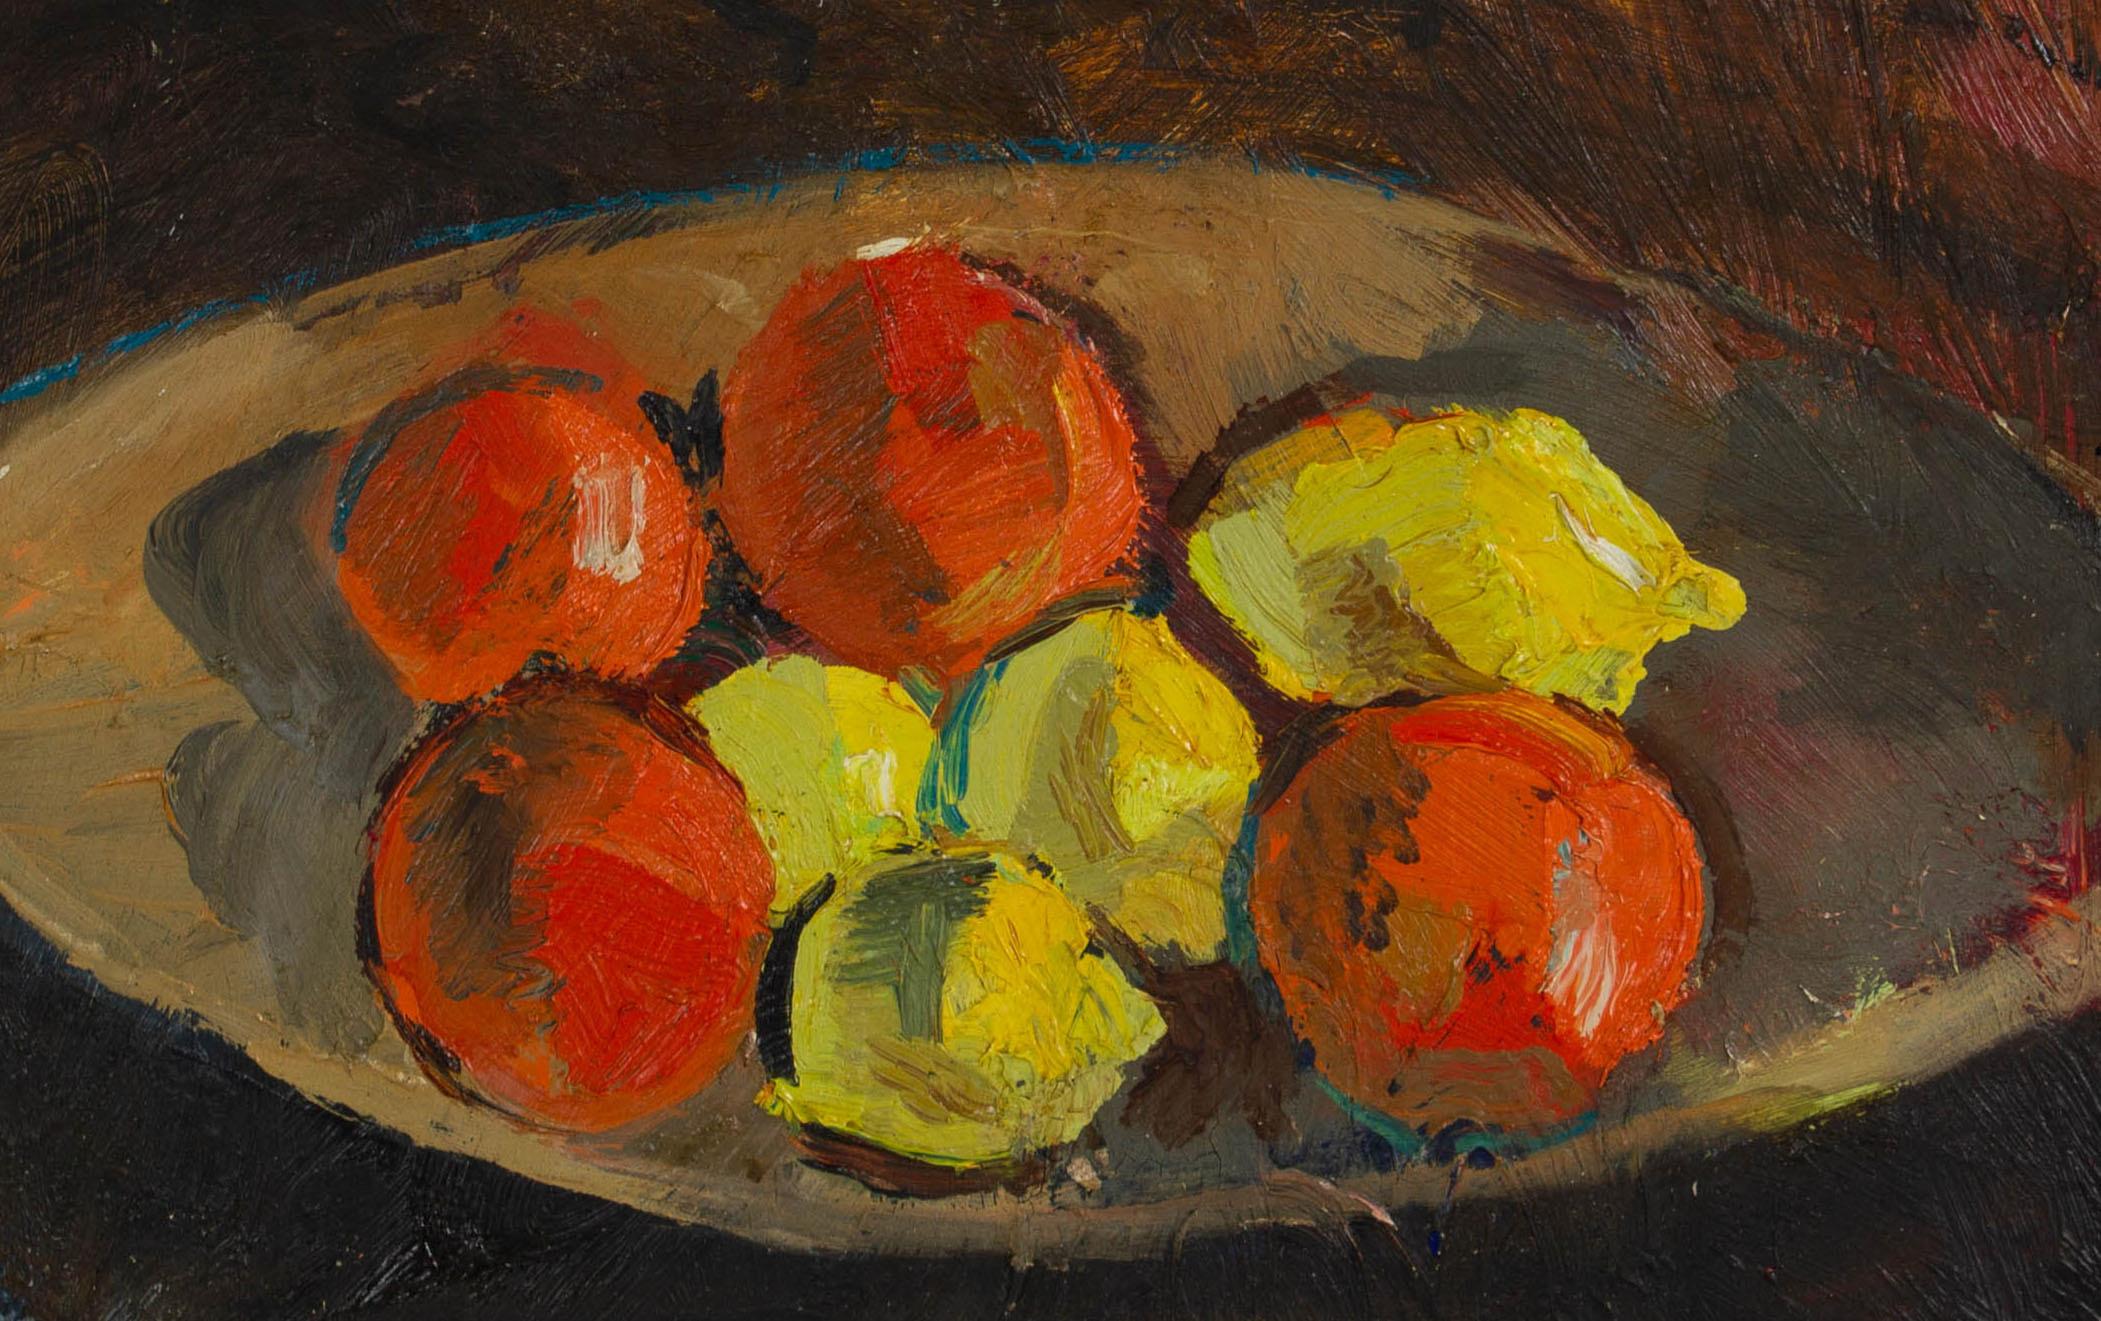 This late 1950s oil on masonite still life with lemons and oranges is by Bay Area painter, printmaker, and designer Calvin Anderson (b. 1925).  He studied at CCAC and Art Center College in the 1940s and worked as a commercial art director in San